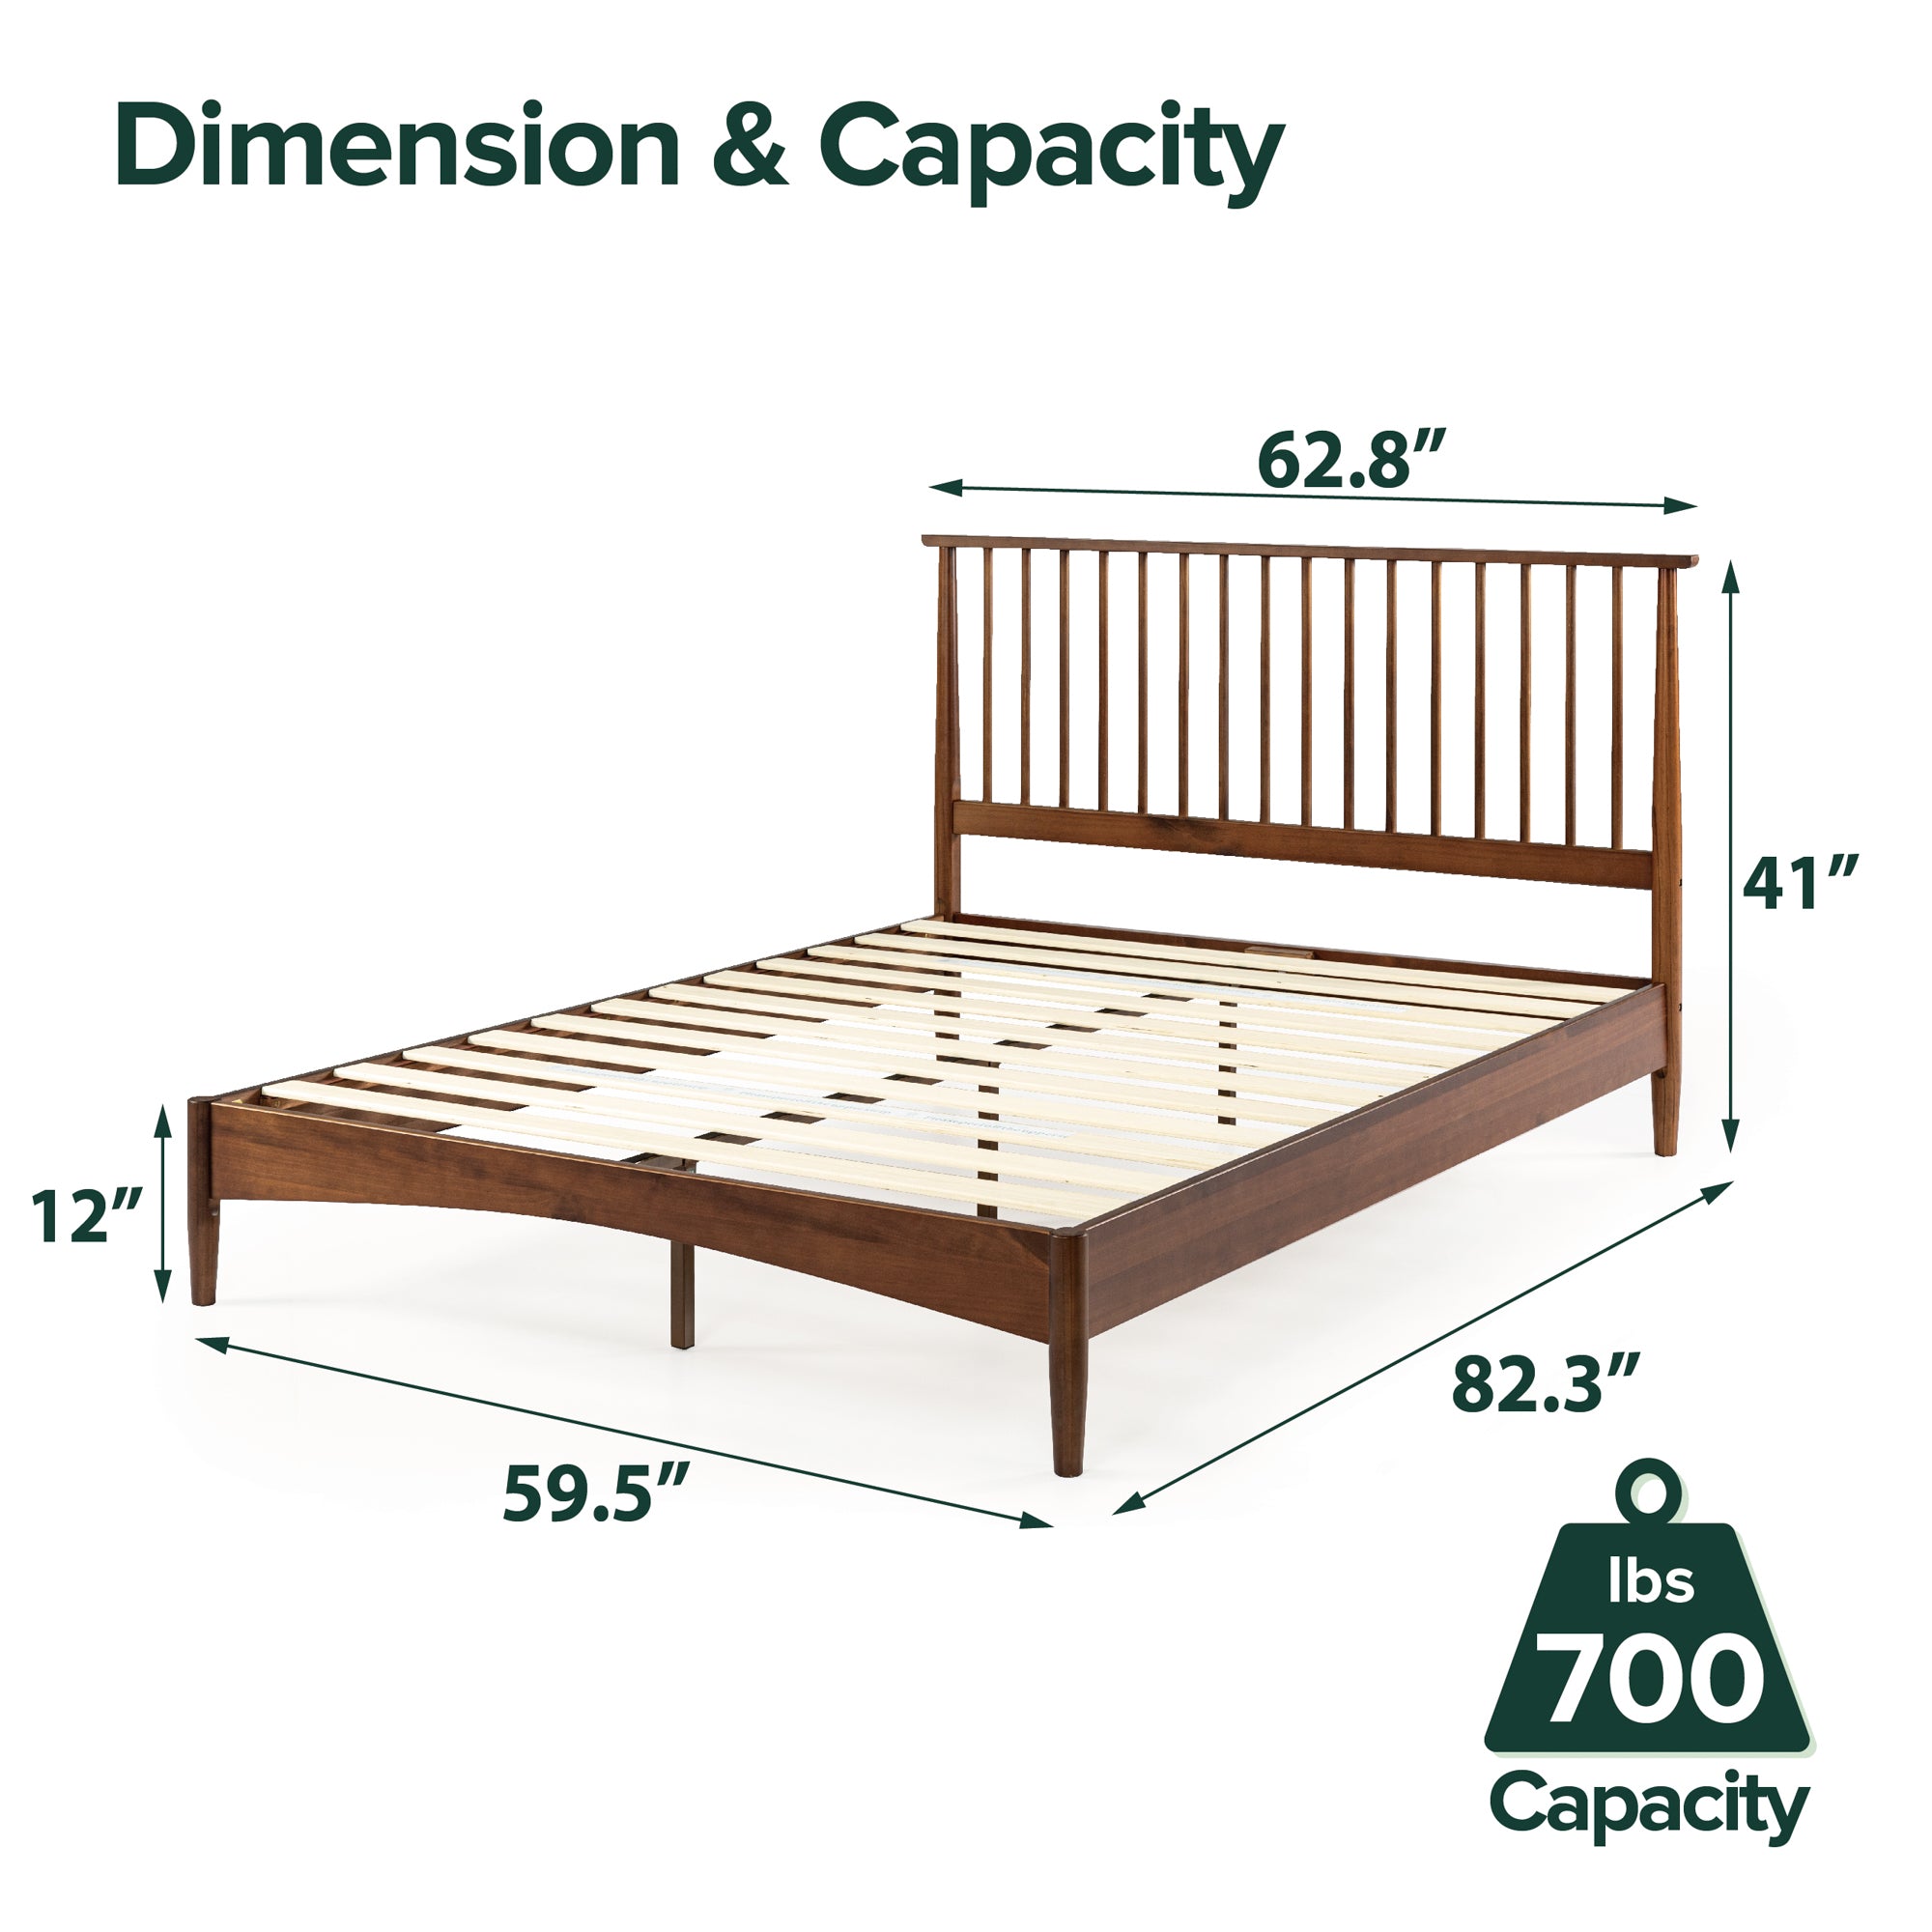 king size bed frame dimensions